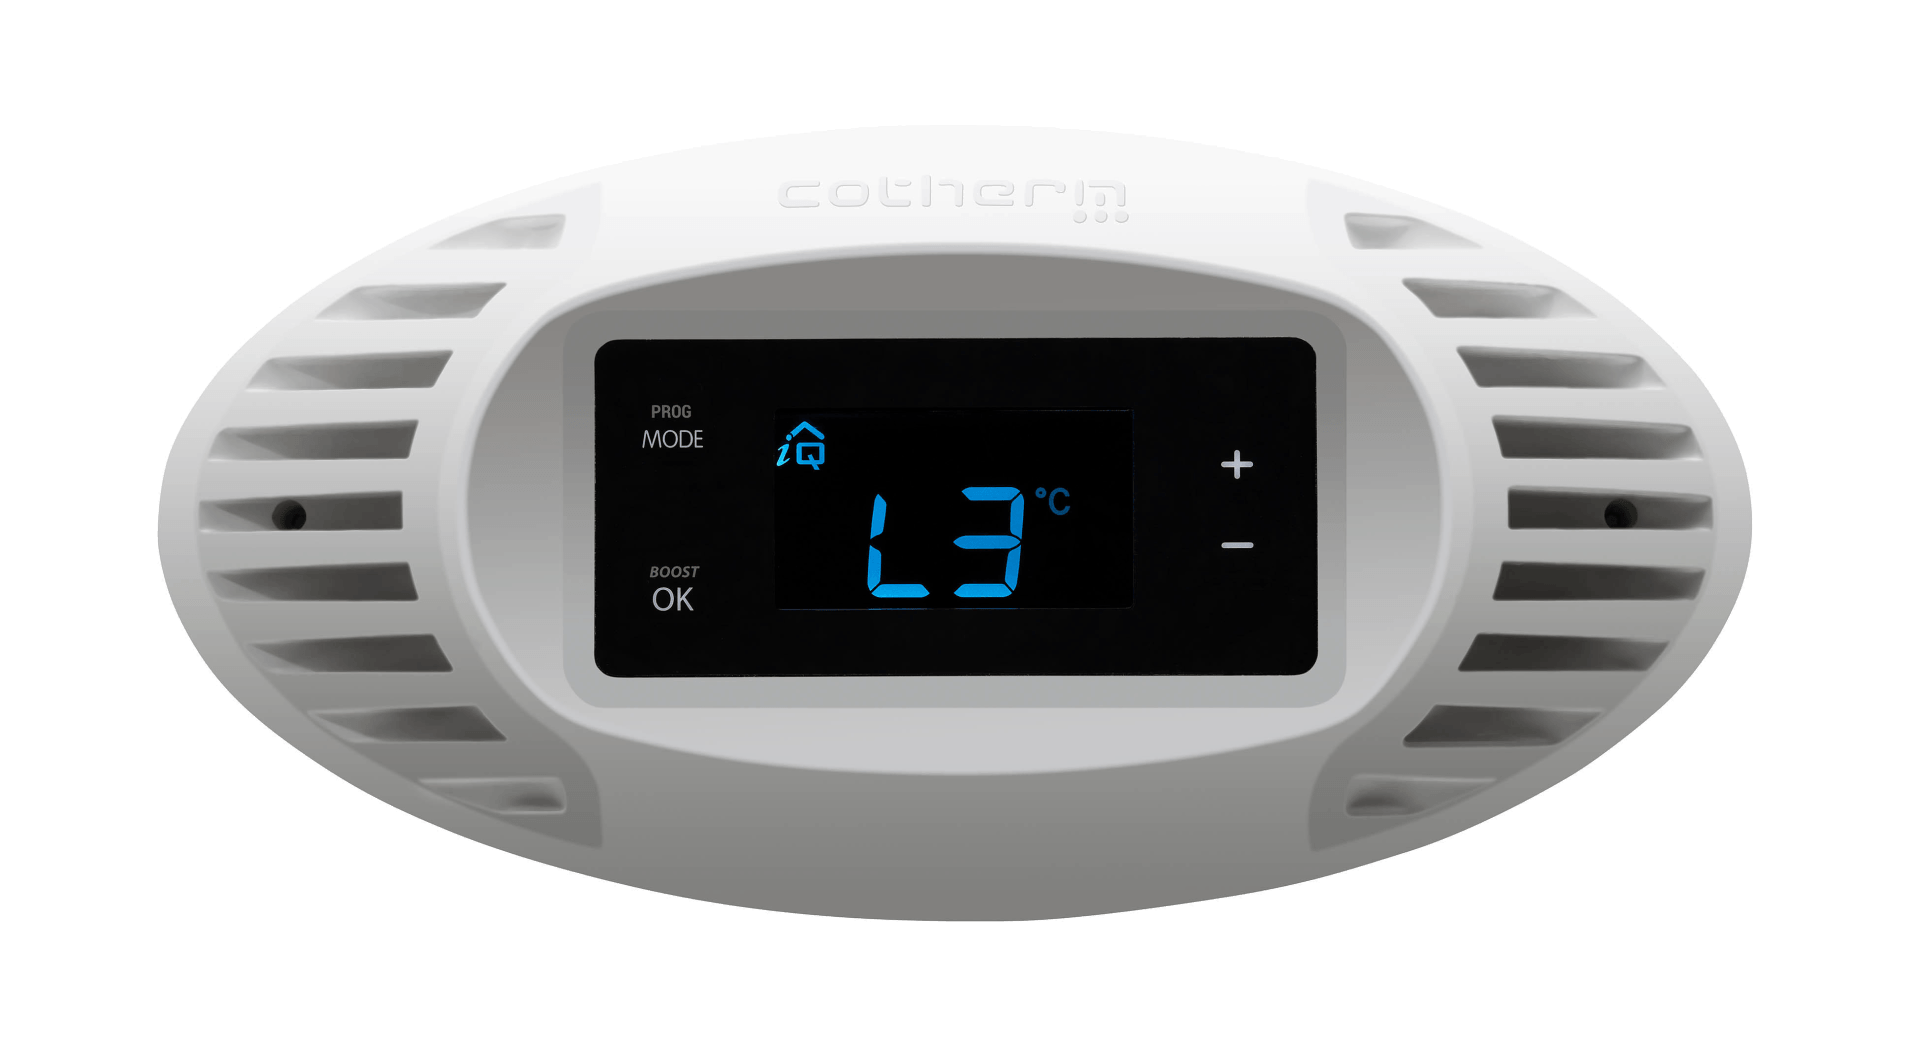 Cotherm PIL is the best immersion timer with built in SMART thermostat technology